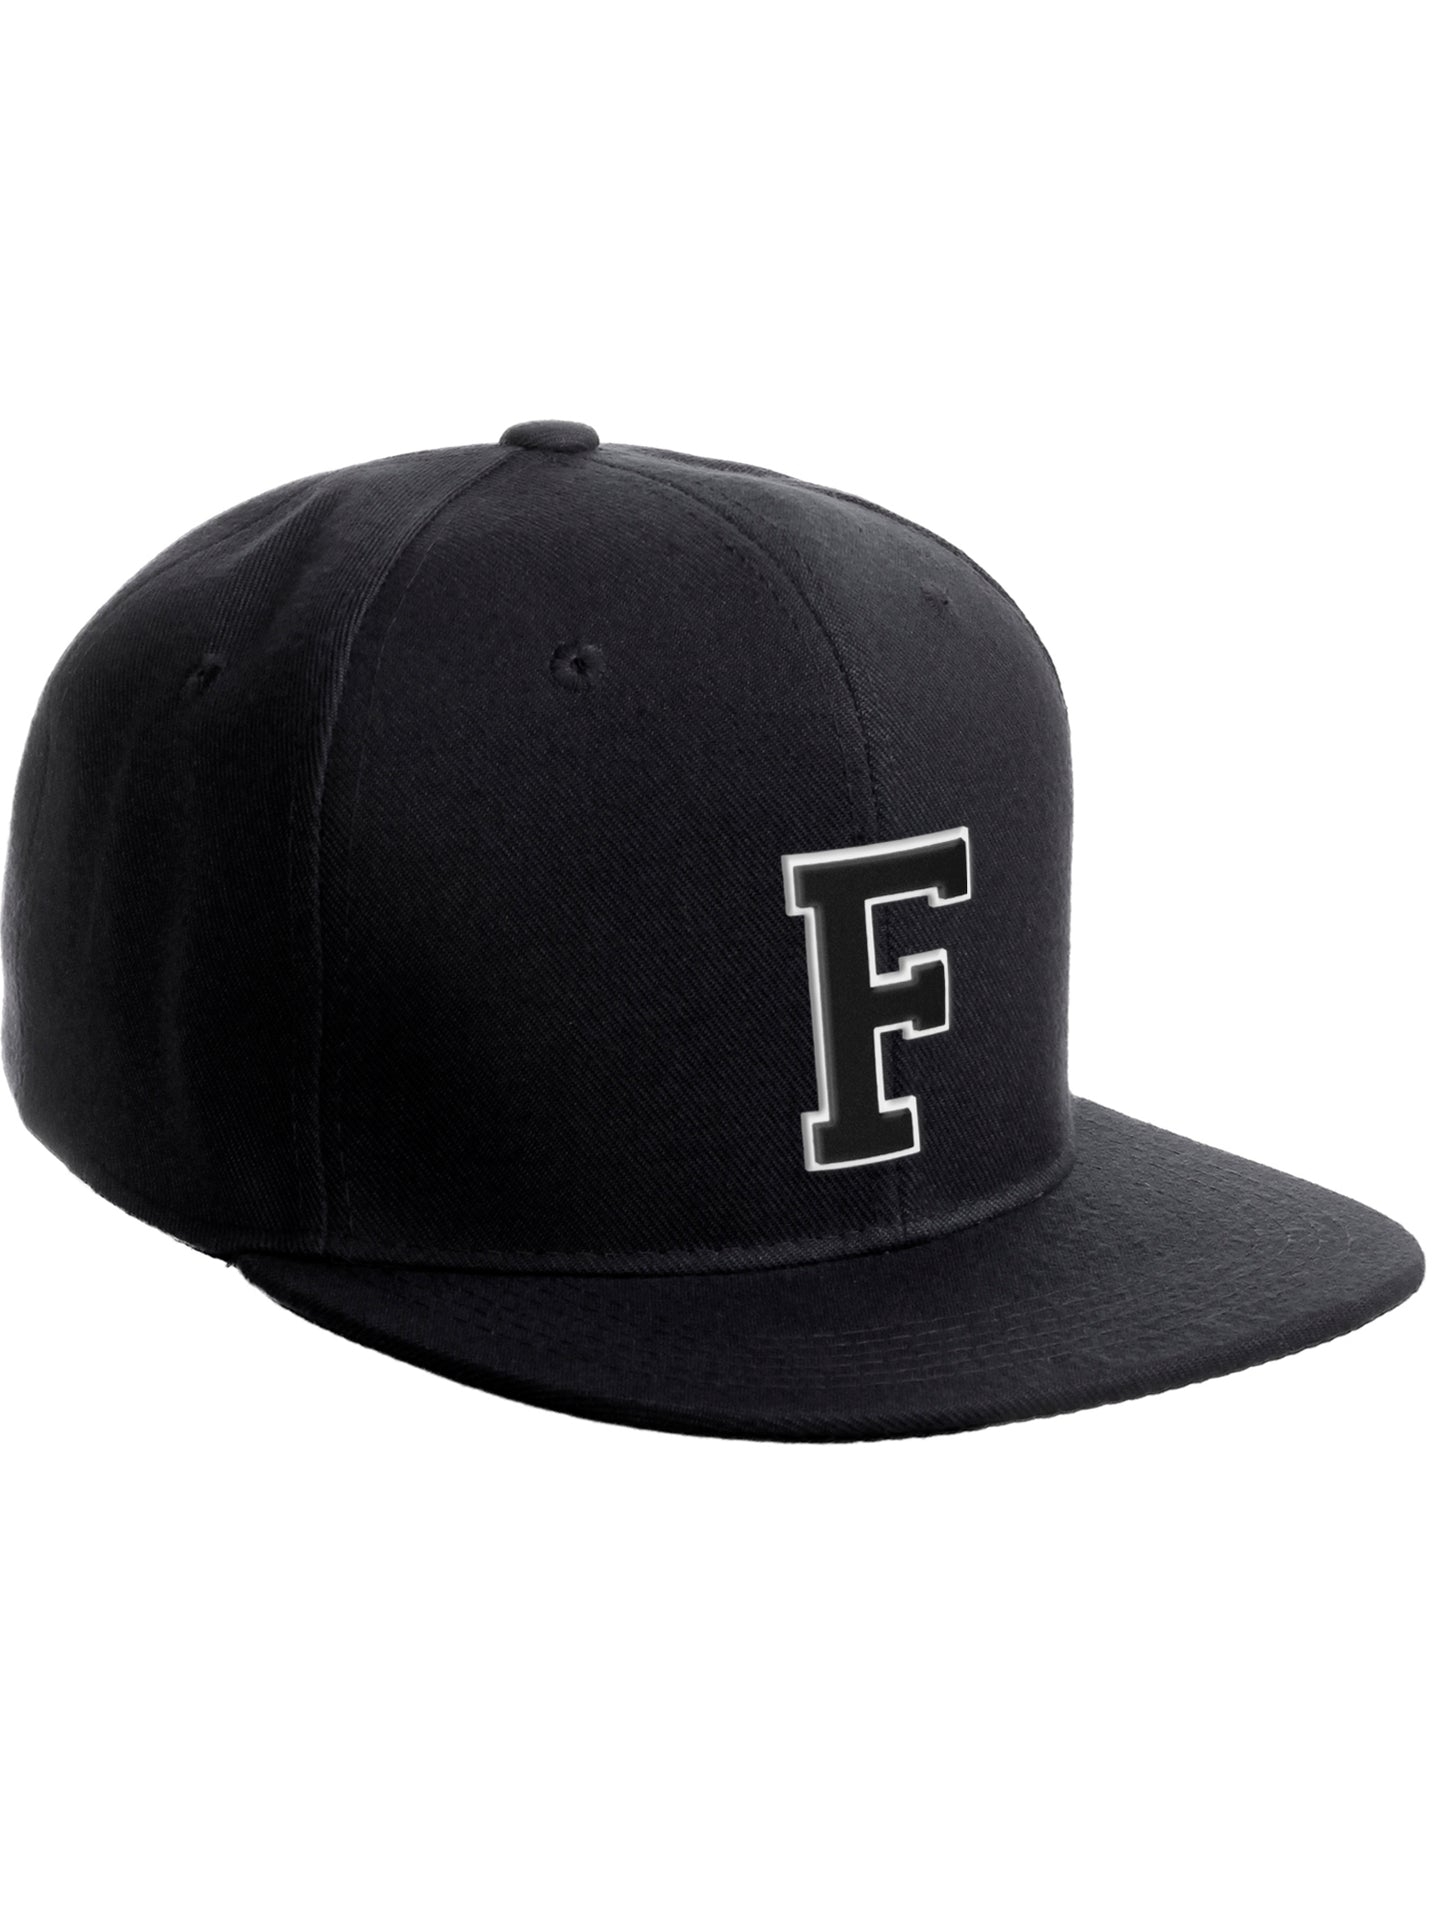 Classic Snapback Hat Custom A to Z Initial Raised Letters, Black Cap White Black